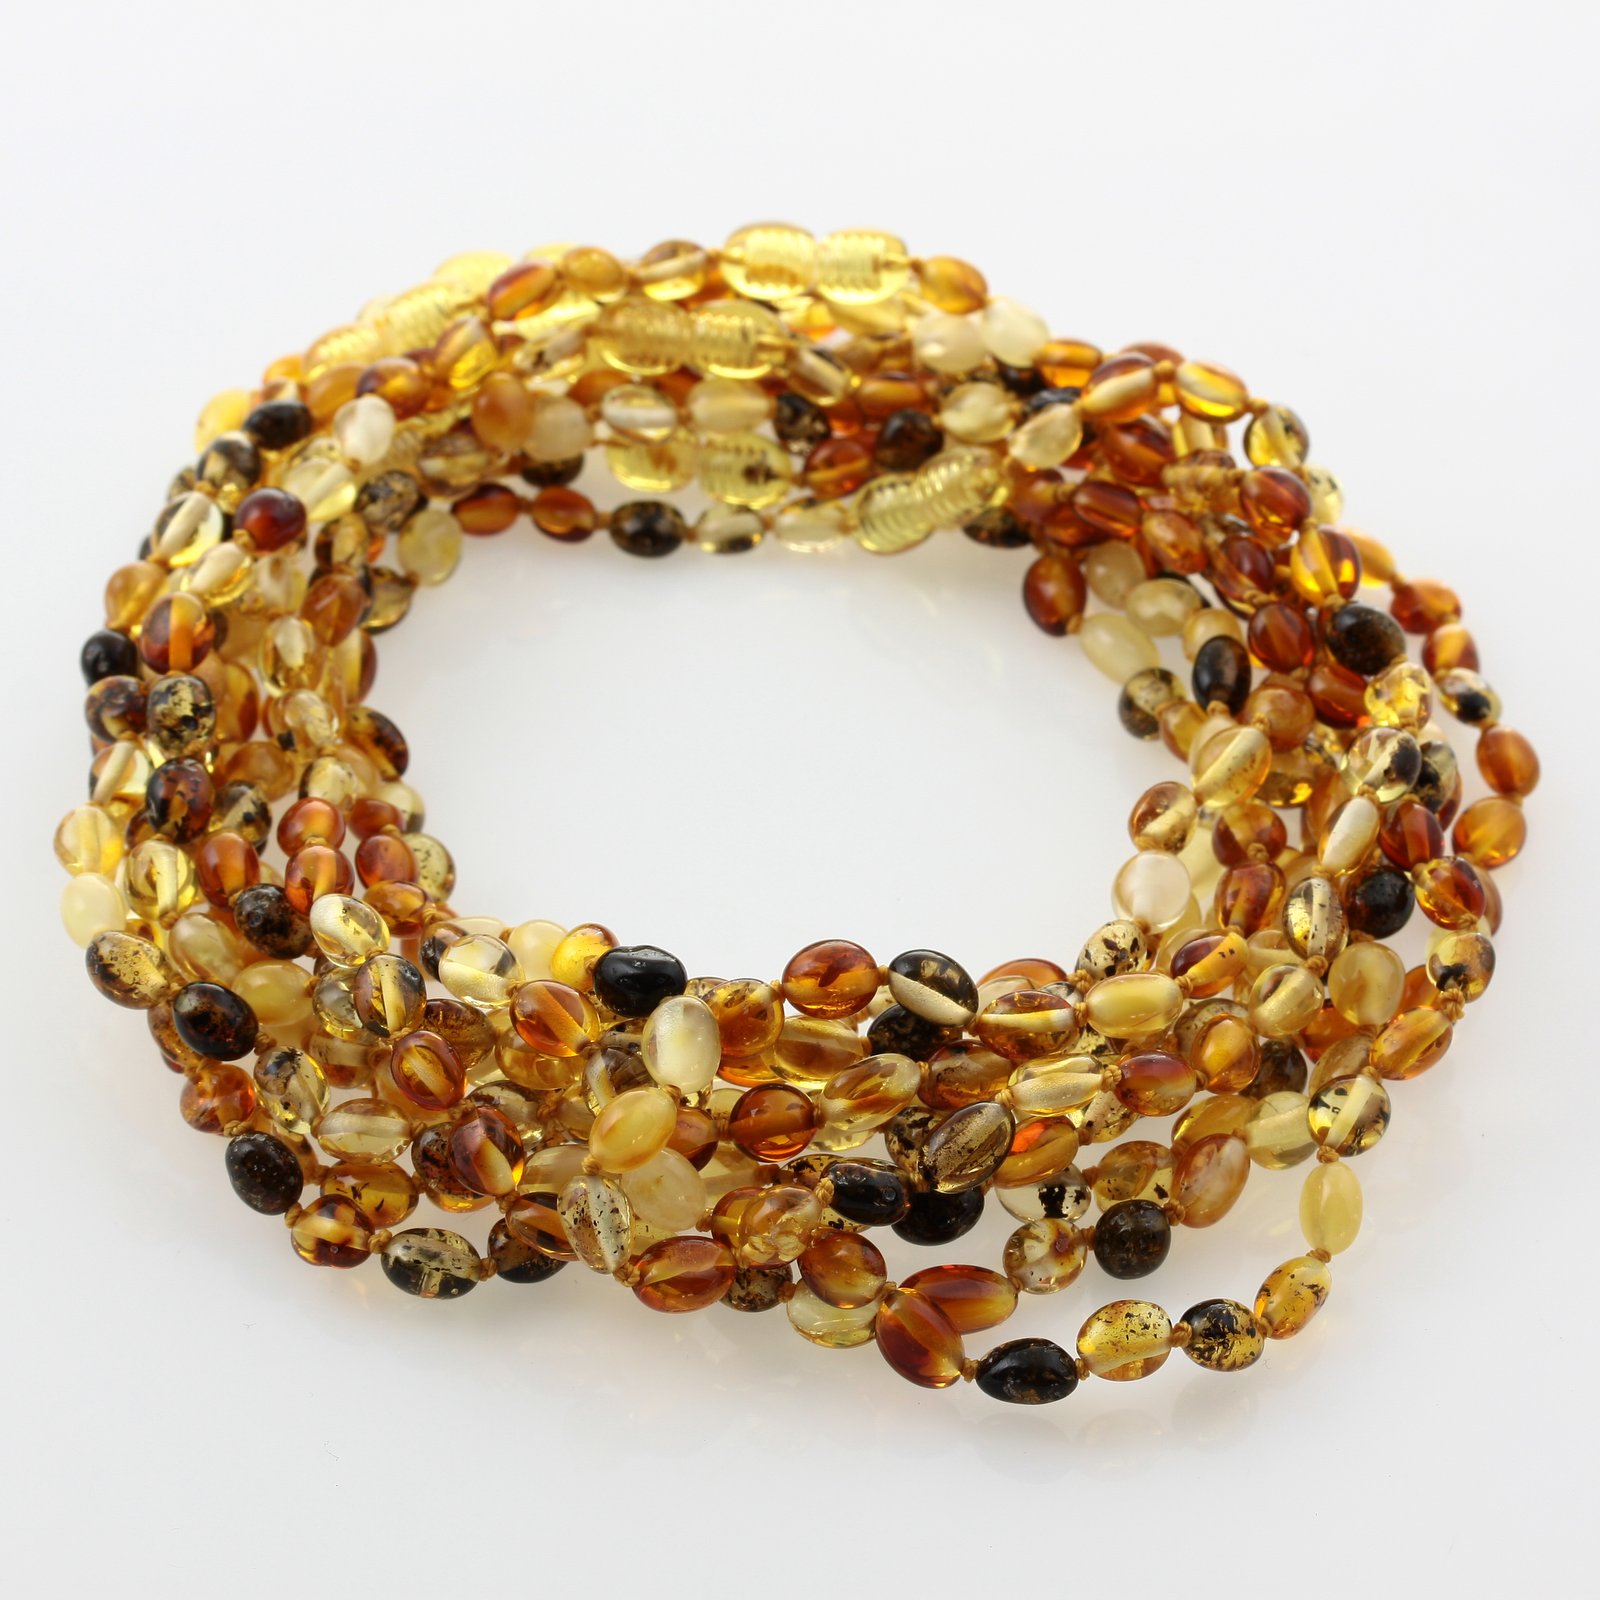 Polished Oval Beads Various Color Choker 15" BALTIC AMBER NECKLACES Lot of 10